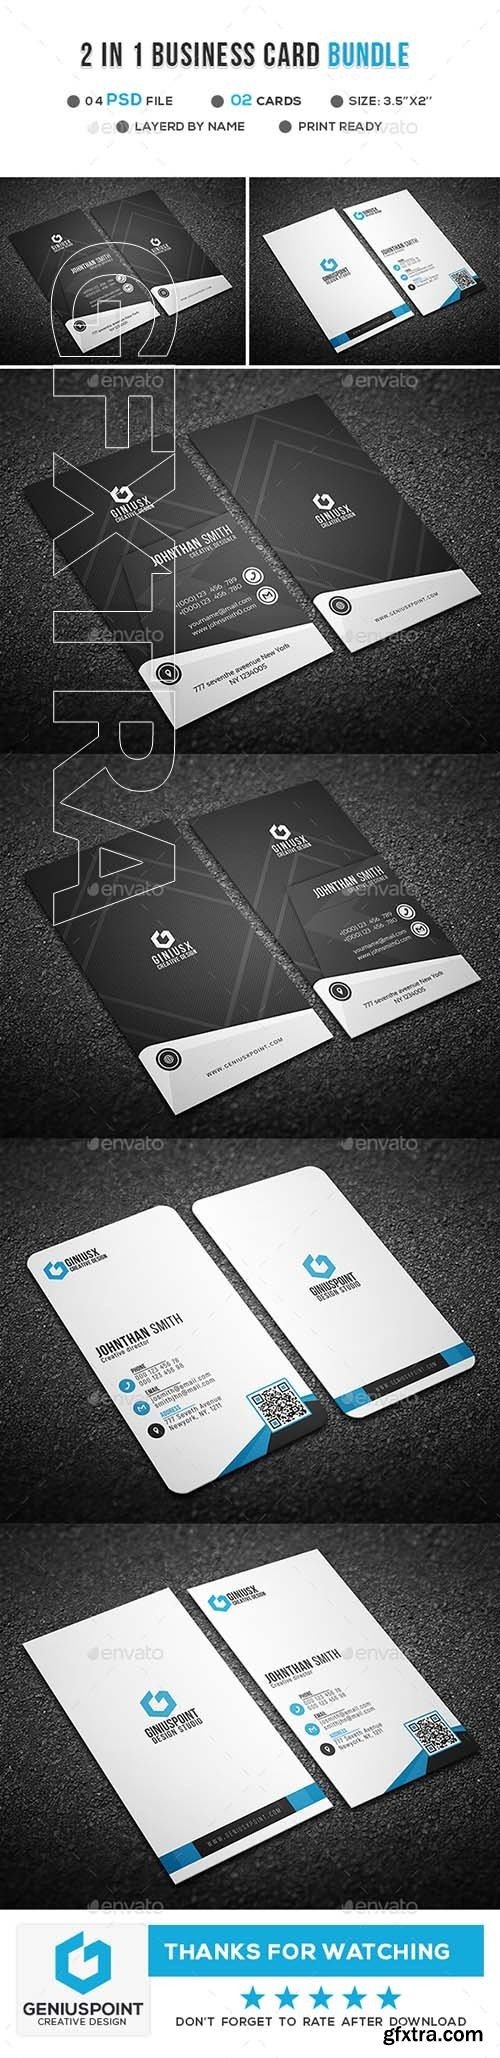 GraphicRiver - 2 in 1 Business Card Bundle 21255328